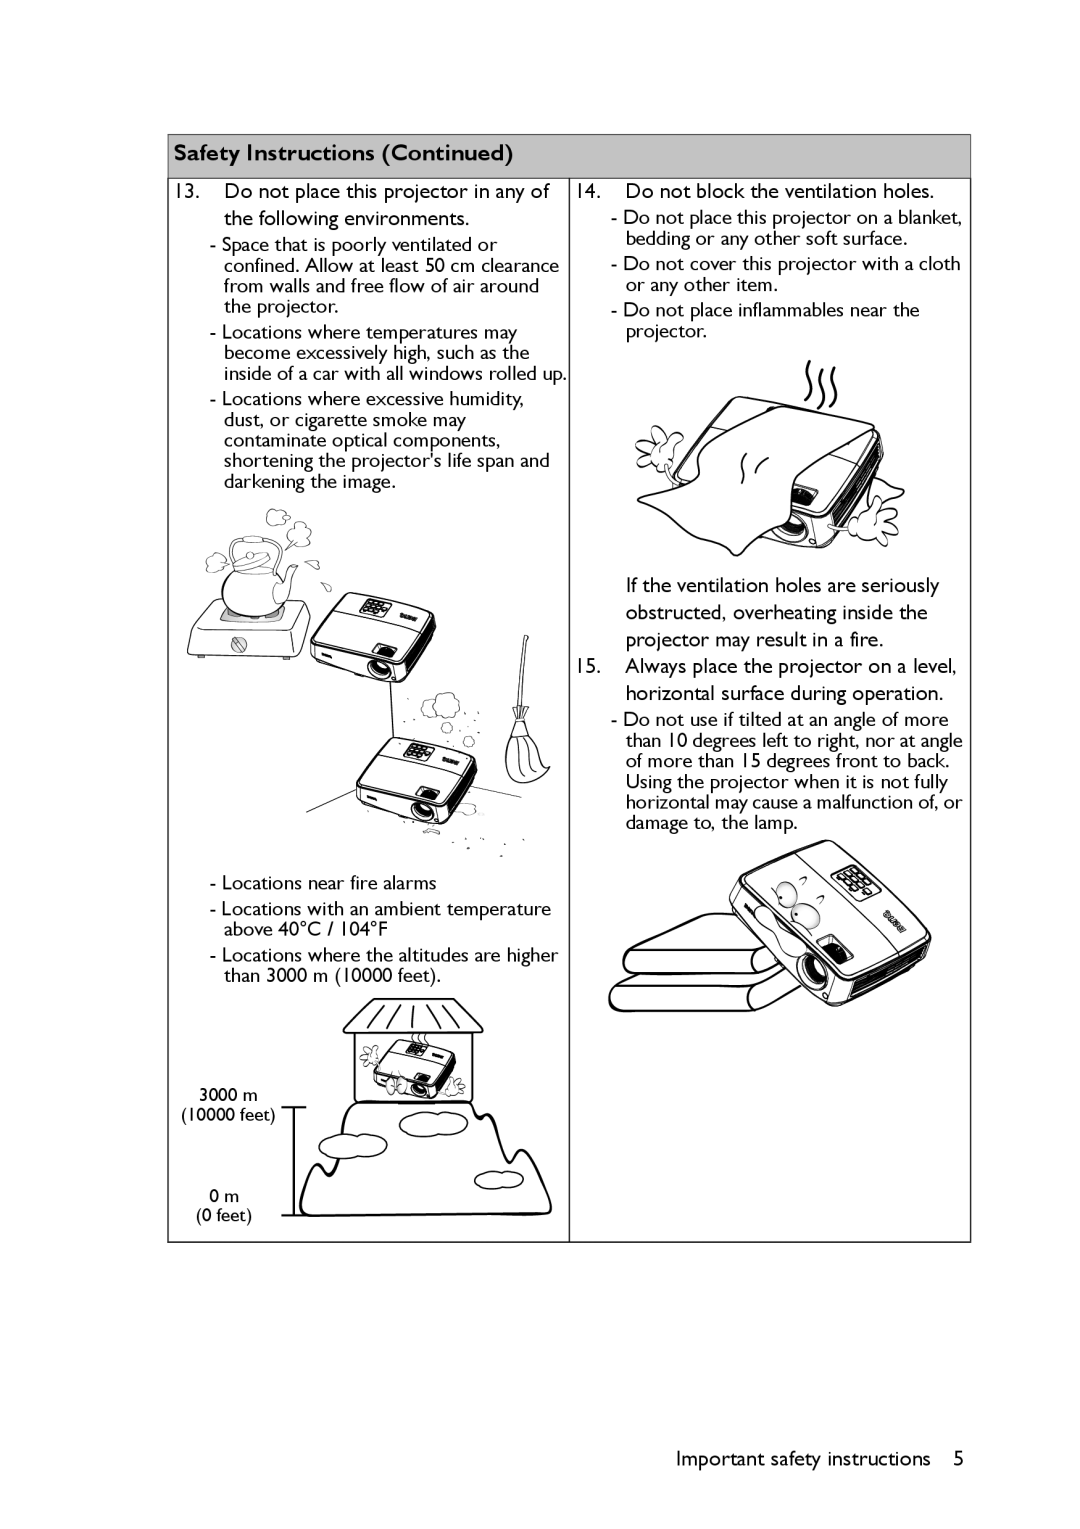 BenQ MS521 user manual Safety Instructions Continued, 3000 m 10000 feet 0 m 0 feet 